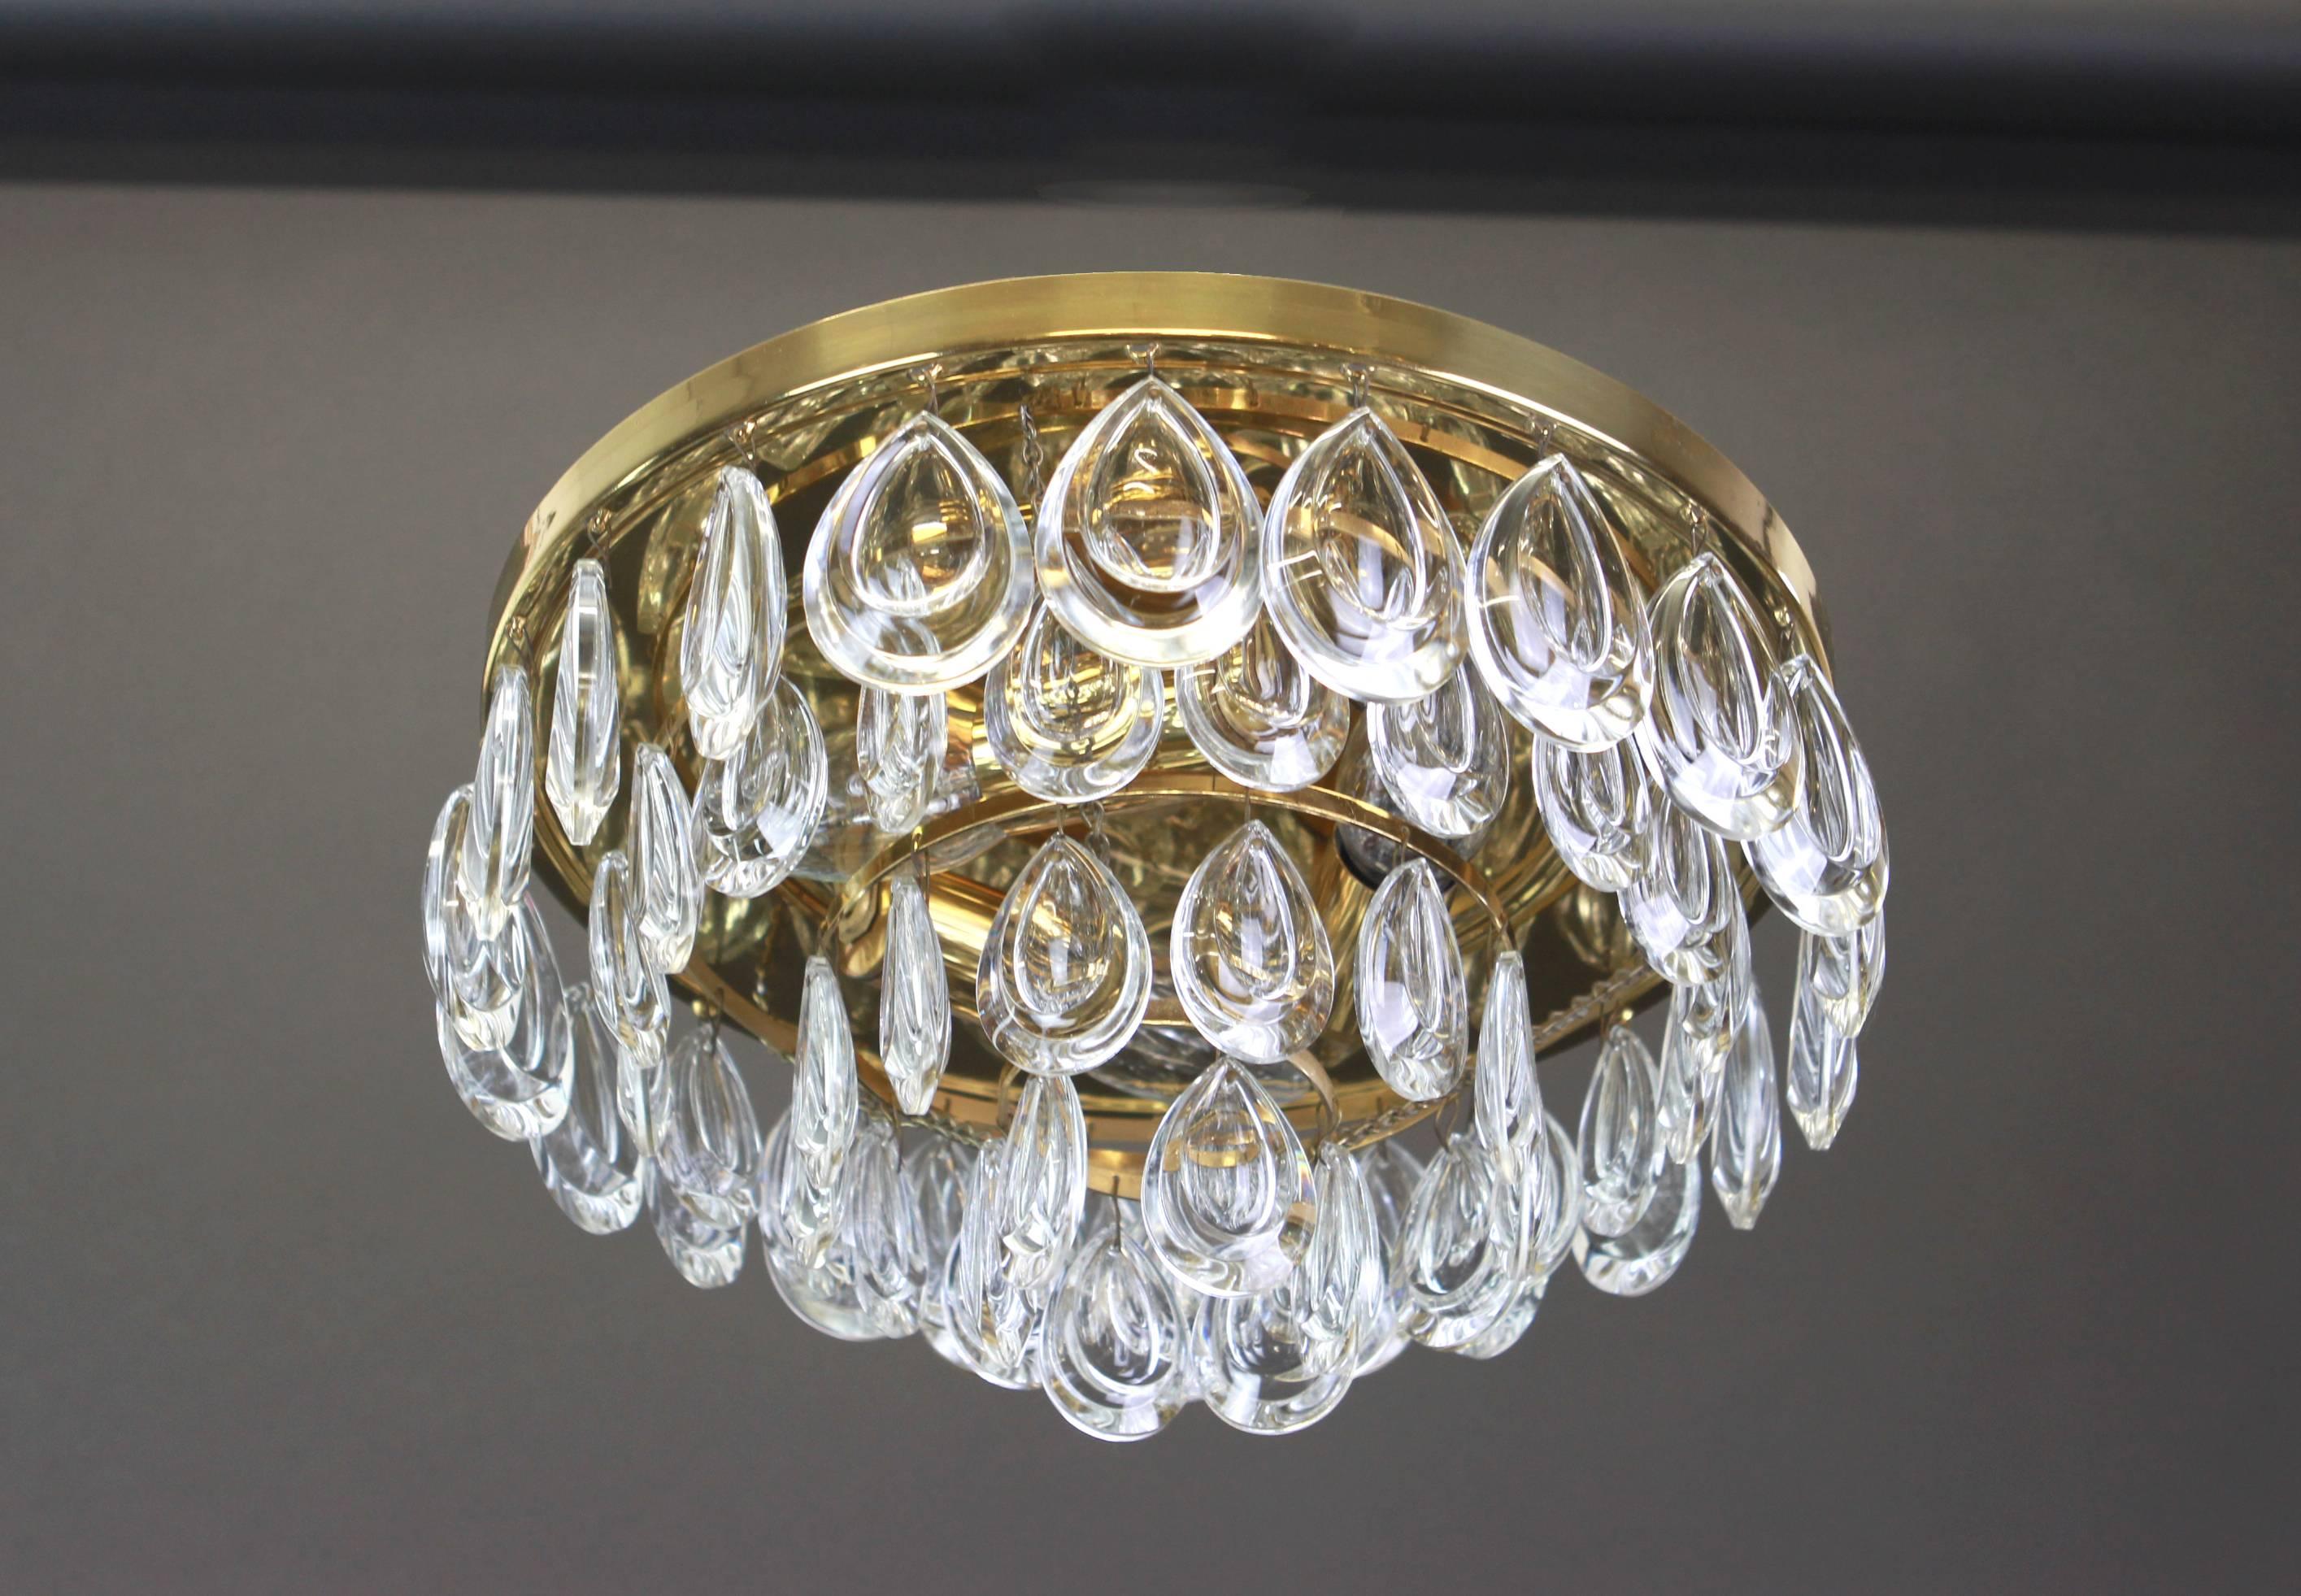 A stunning small four-tier flushmount by Palwa, Germany, manufactured in circa 1970-1979. A handmade and high-quality piece. The ceiling fixture and the frame are made of brass and have four rings with lots of faceted crystal glass elements.

High